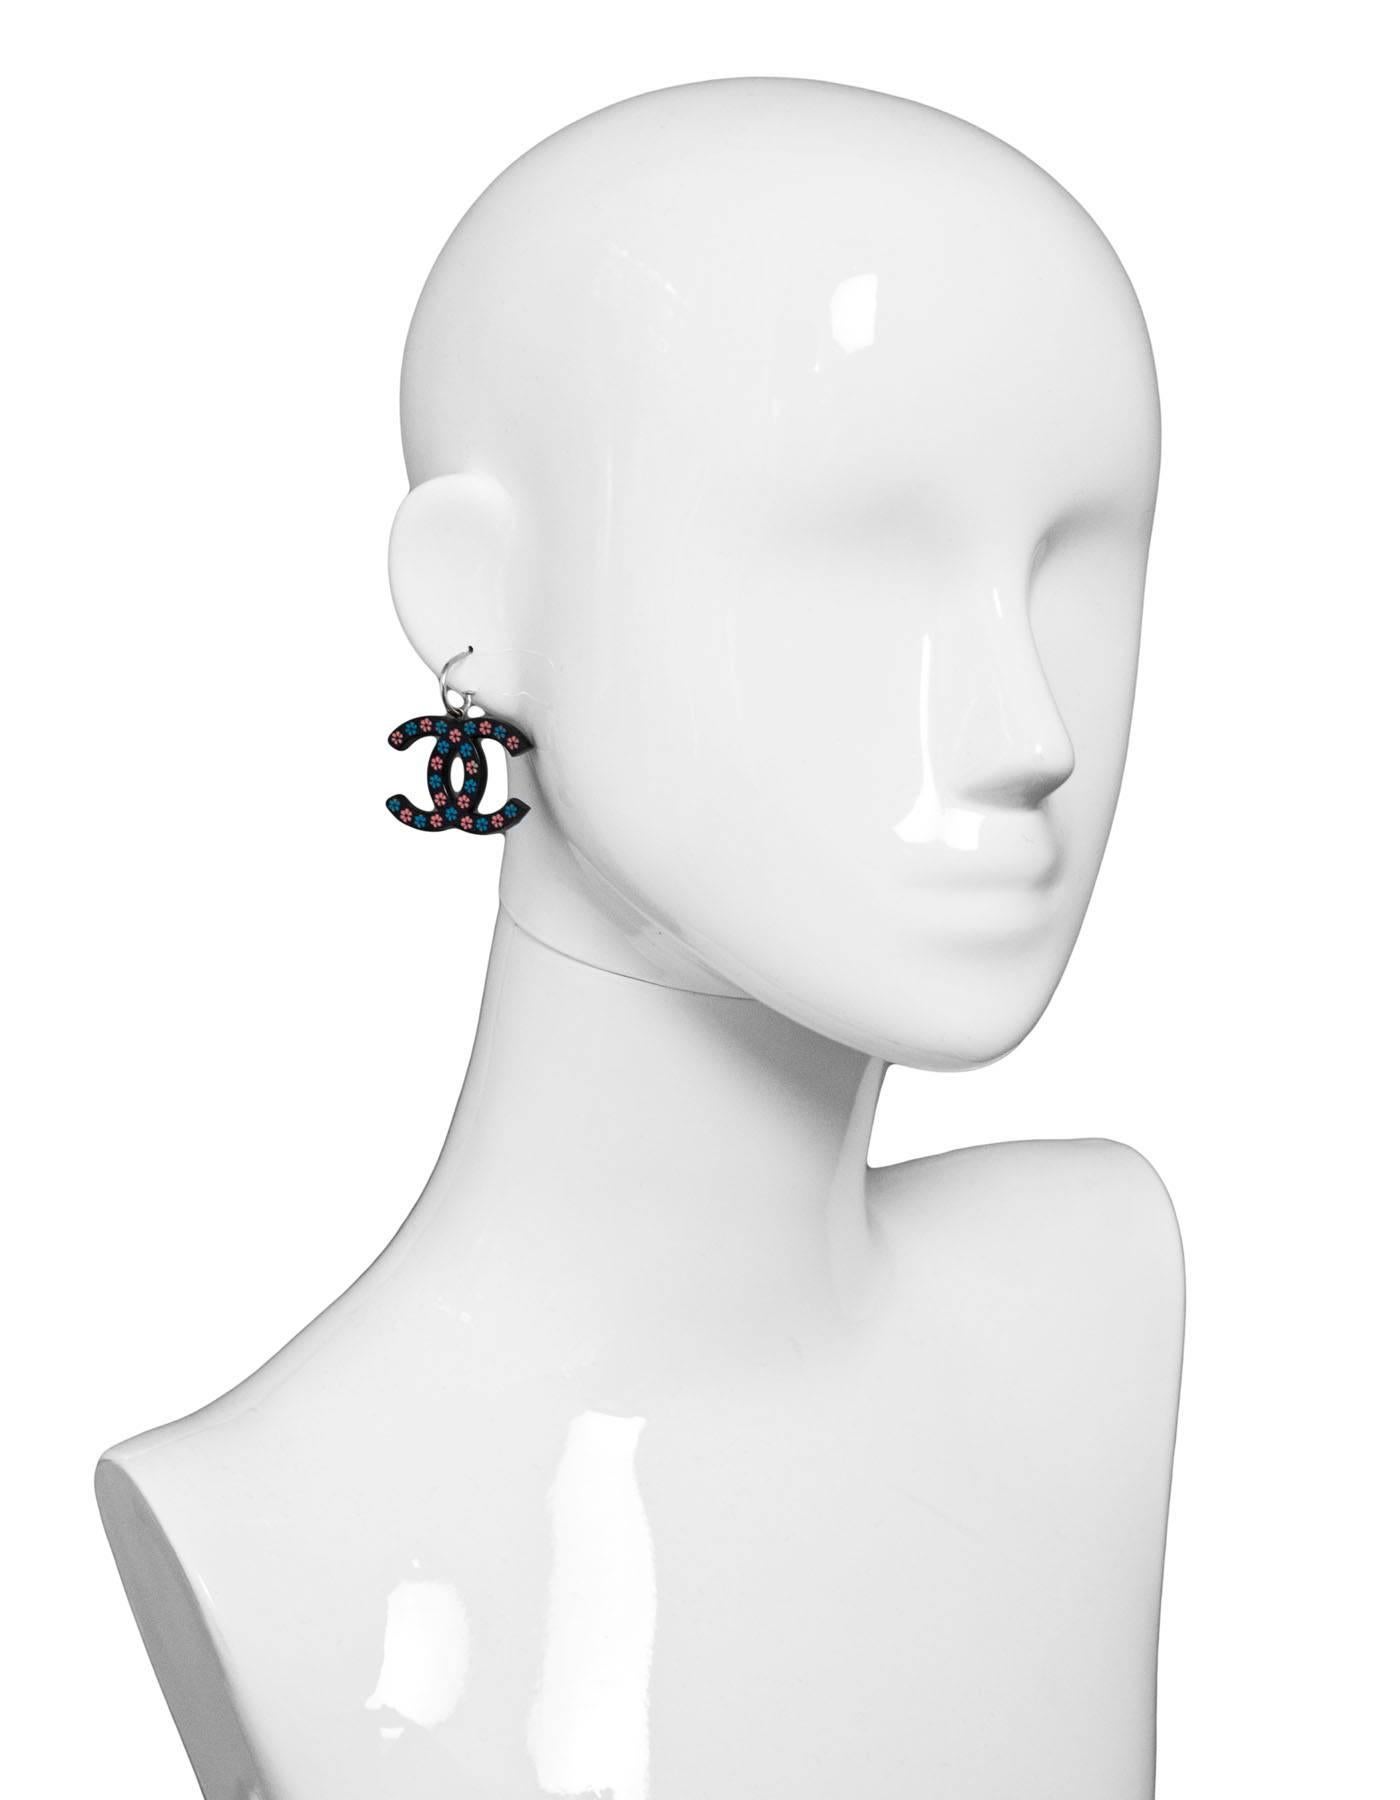 Chanel Black, Blue & Pink Floral CC Earrings

Made In: France
Color: Black, blue, pink
Hardware: Silvertone
Stamp: Chanel 15 CC P Made in France
Materials: Resin, metal
Closure: Pierced back
Overall Condition: Excellent pre-owned